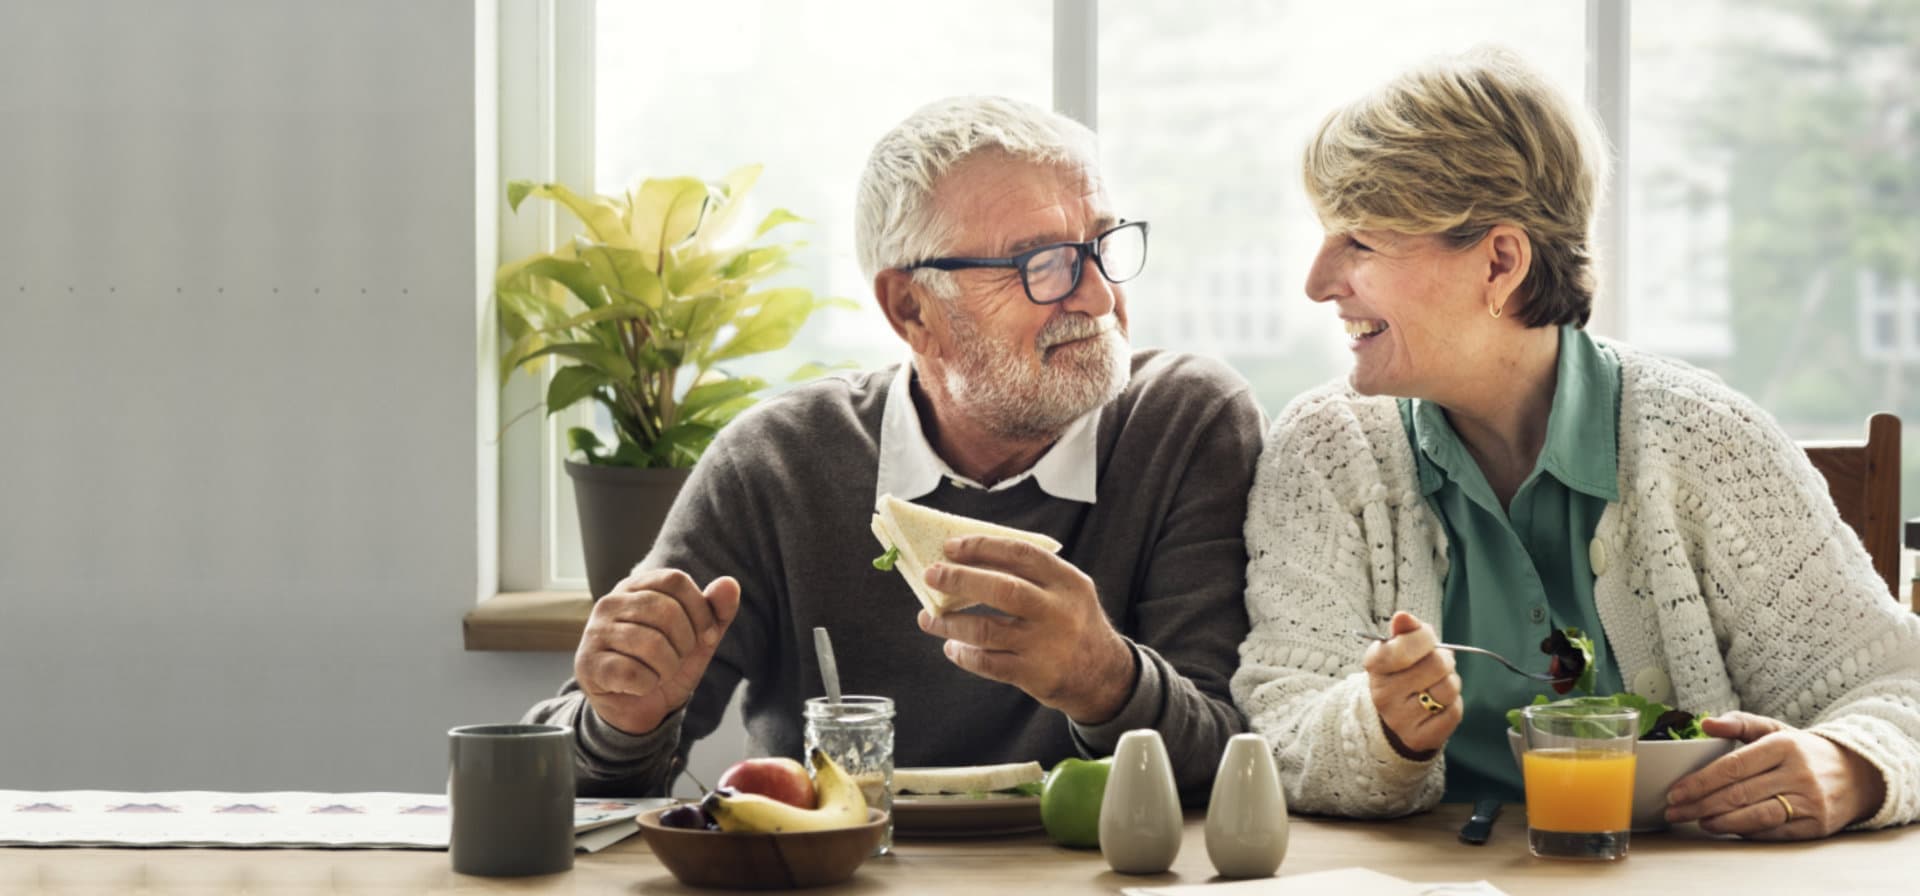 elderly couple talking to each other while eating